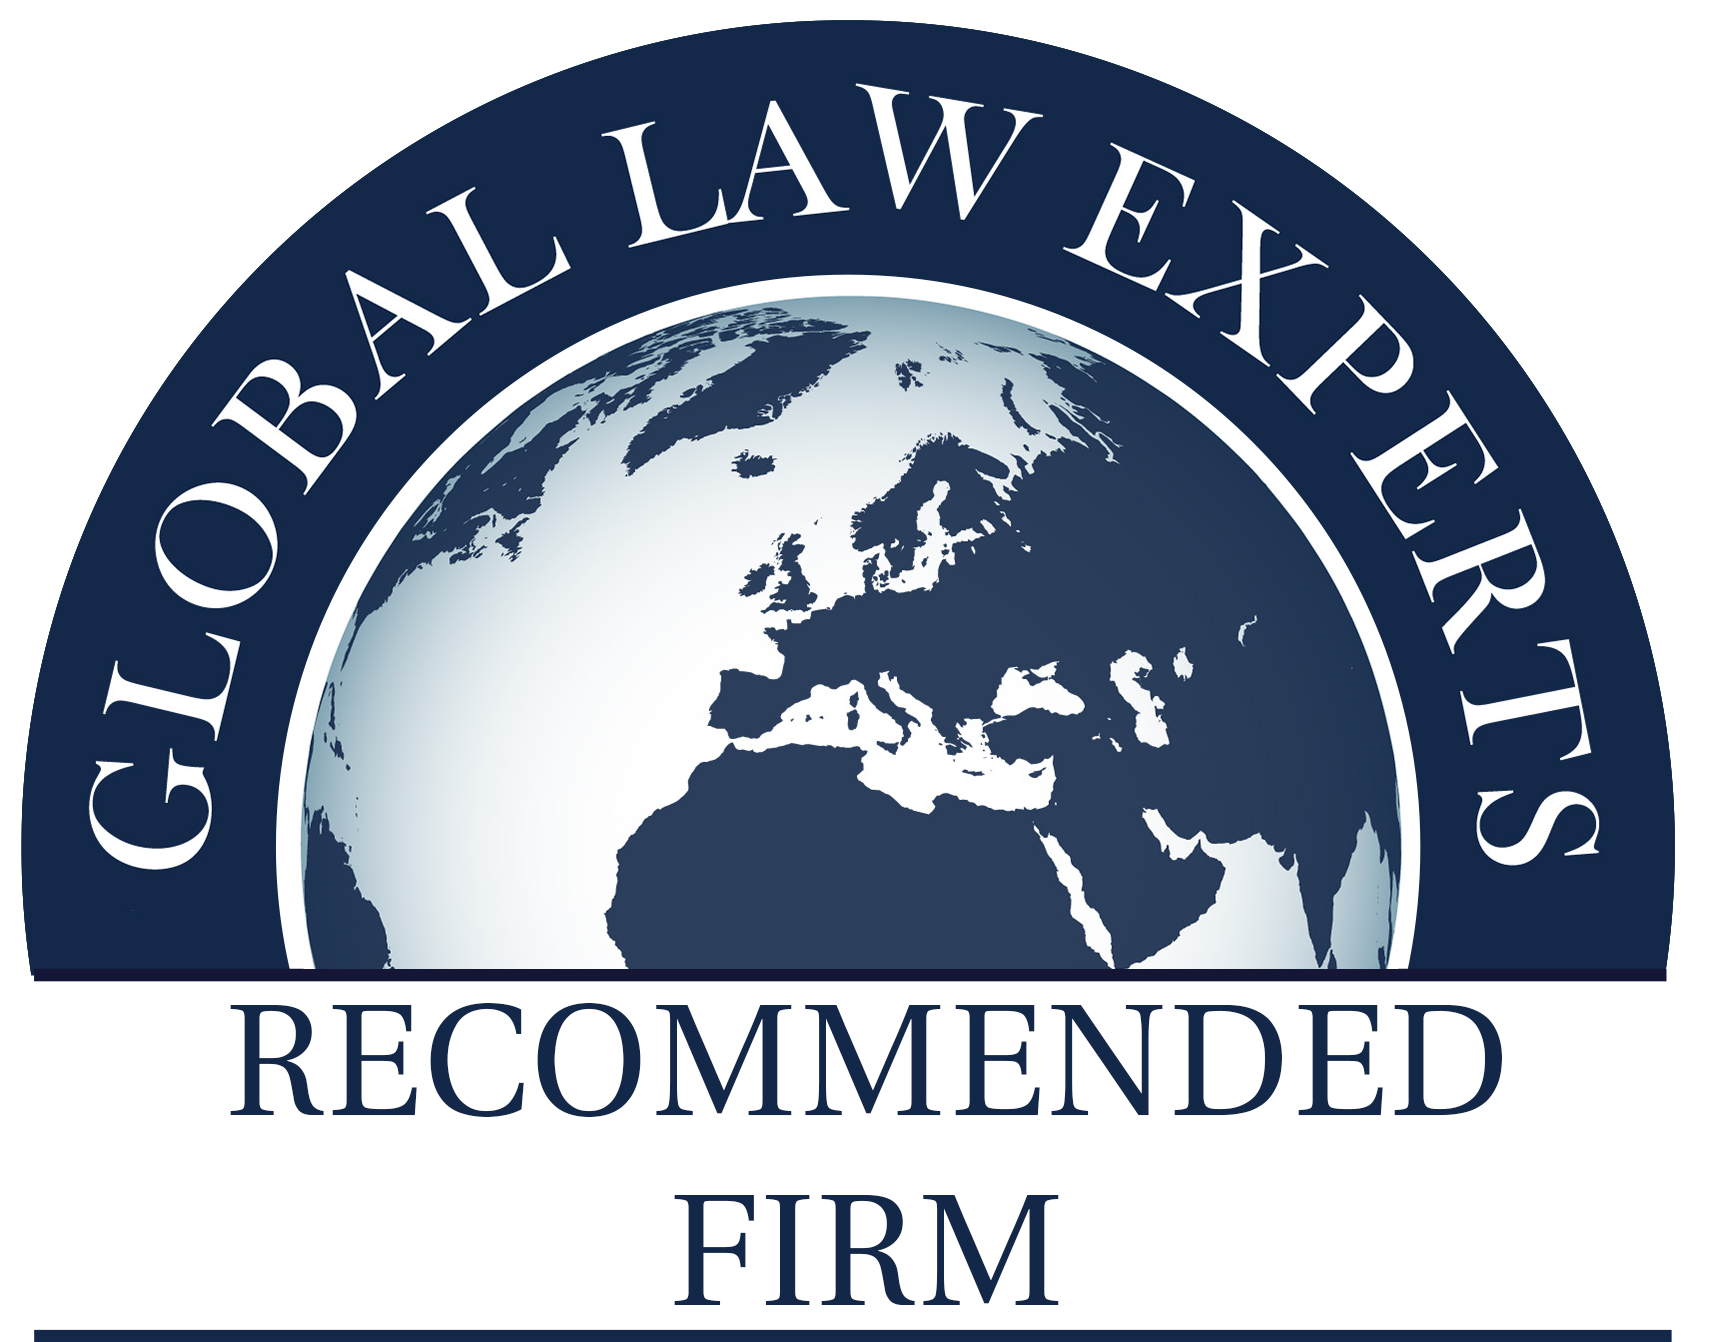 GLOBAL LAW EXPERTS - RECOMMENDED FIRM